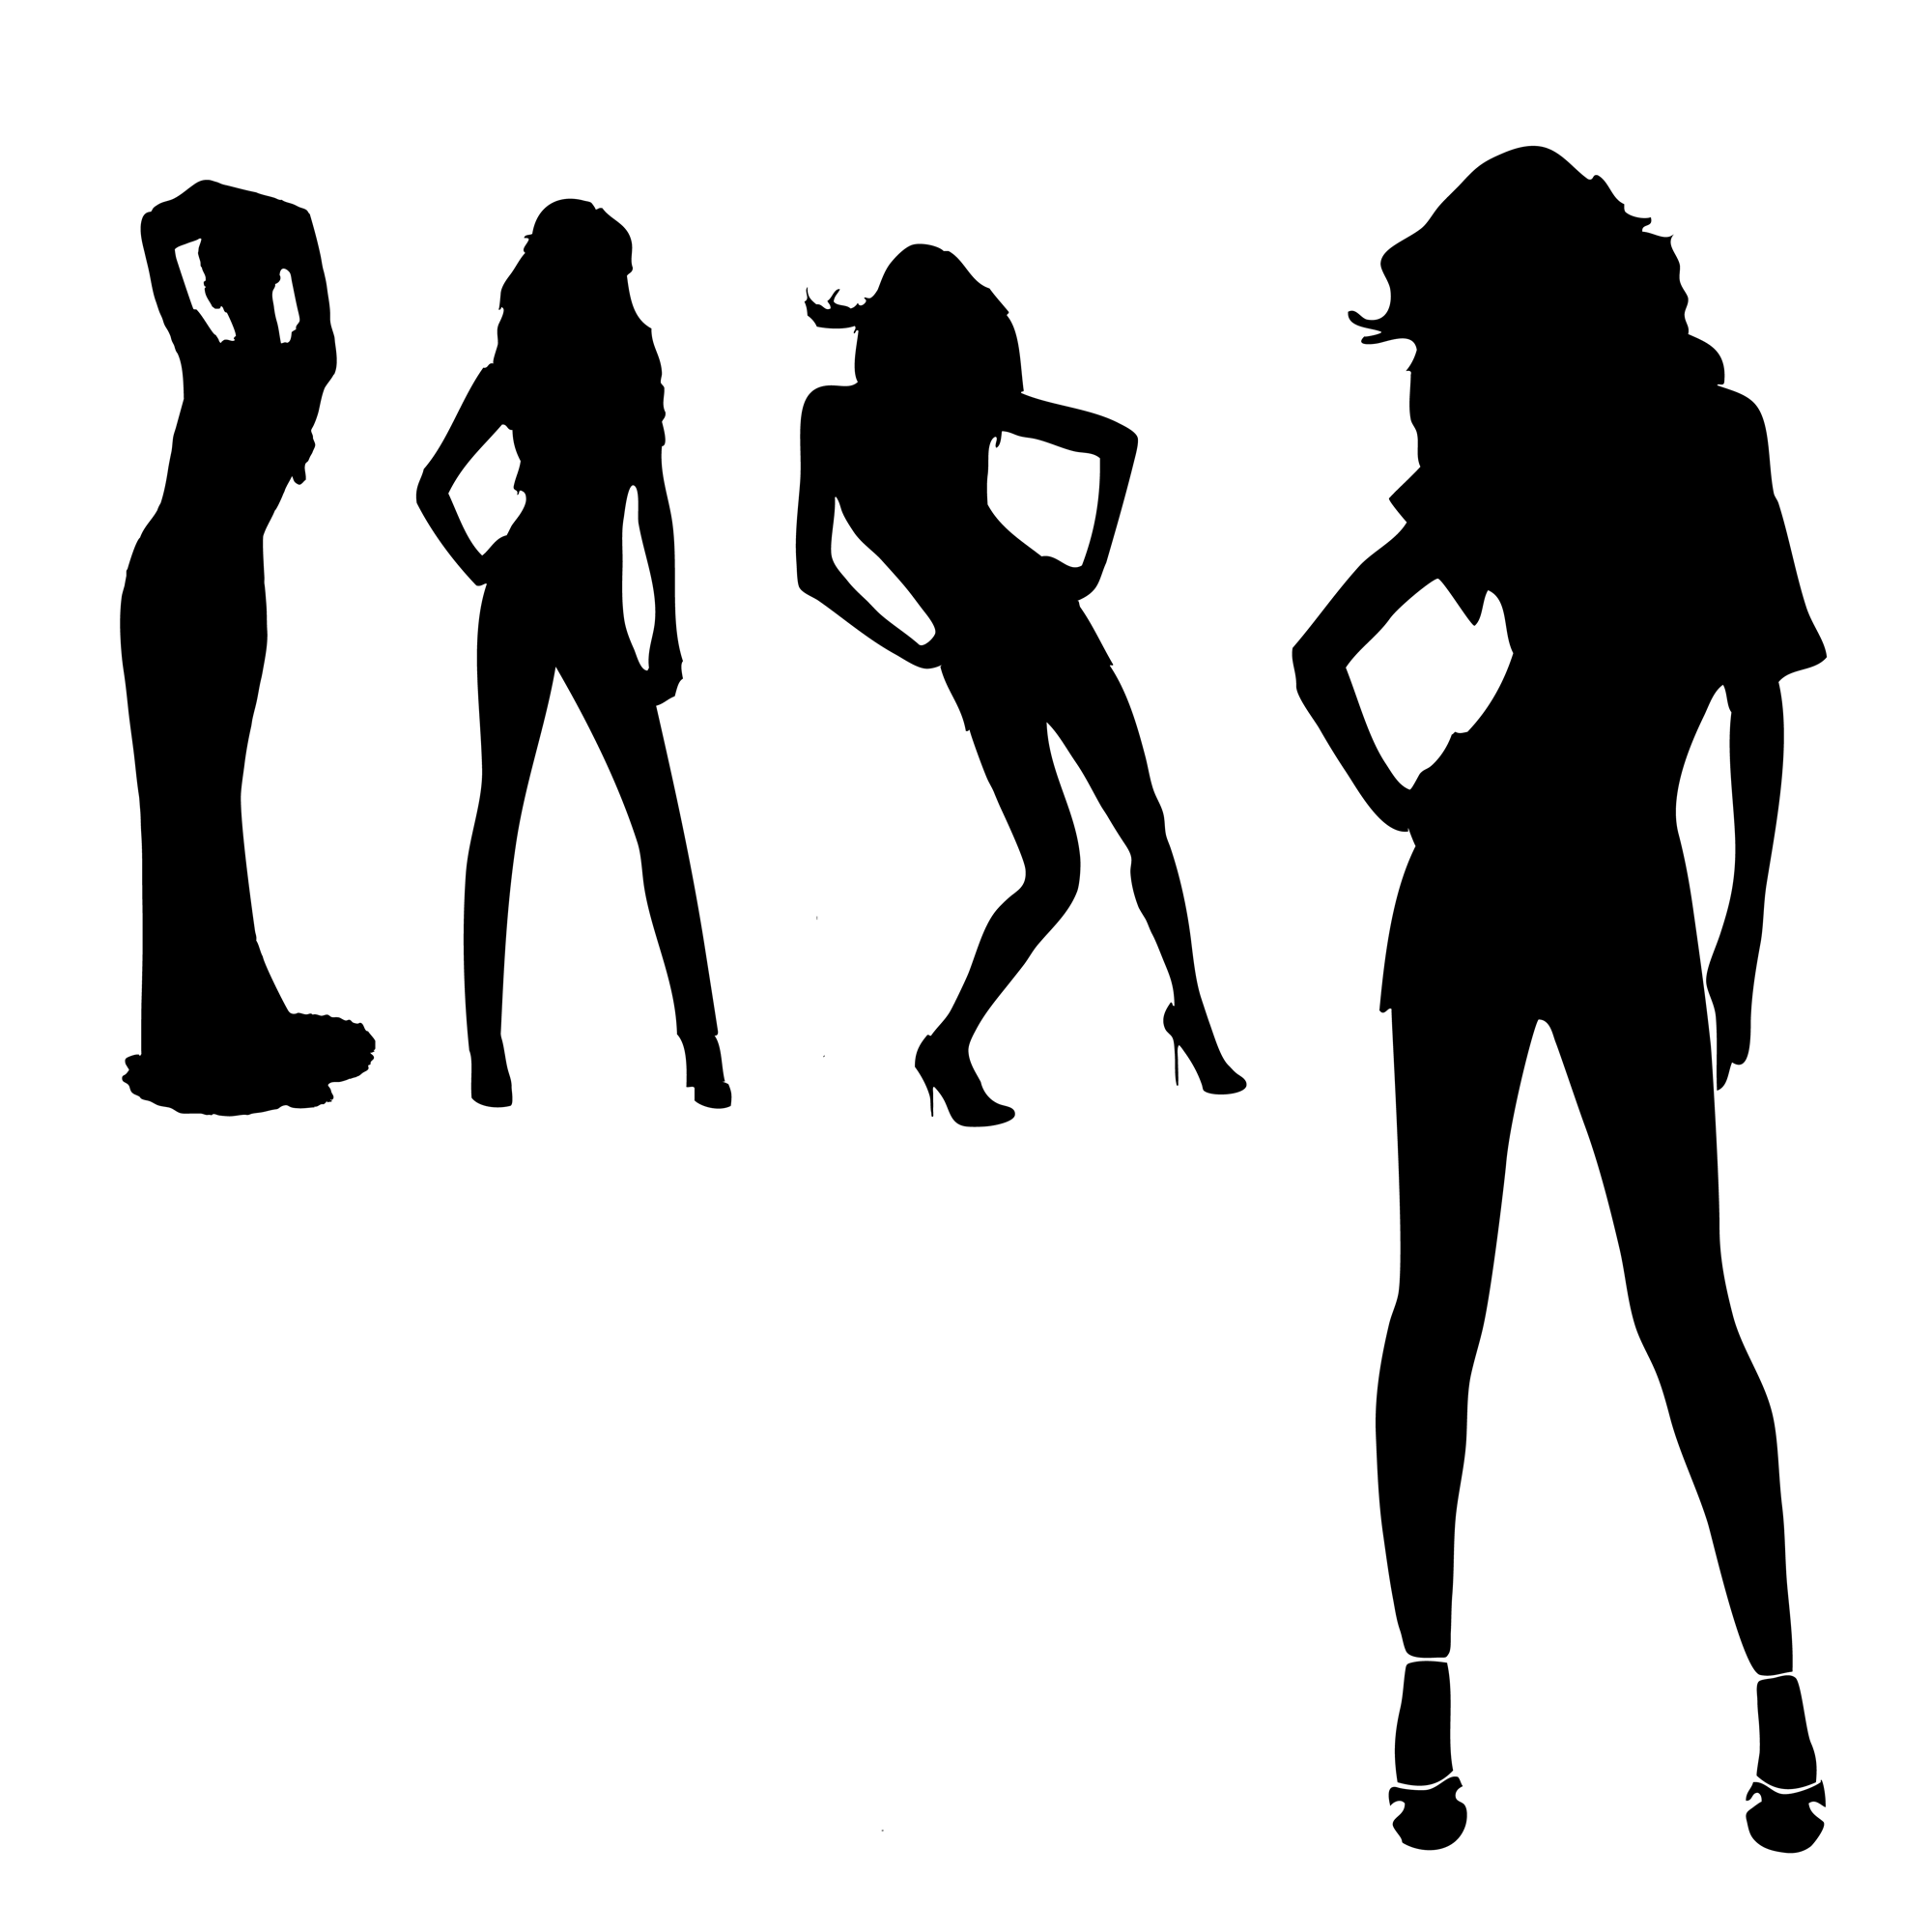 Trends For > Women In Dress Silhouette - Cliparts.co